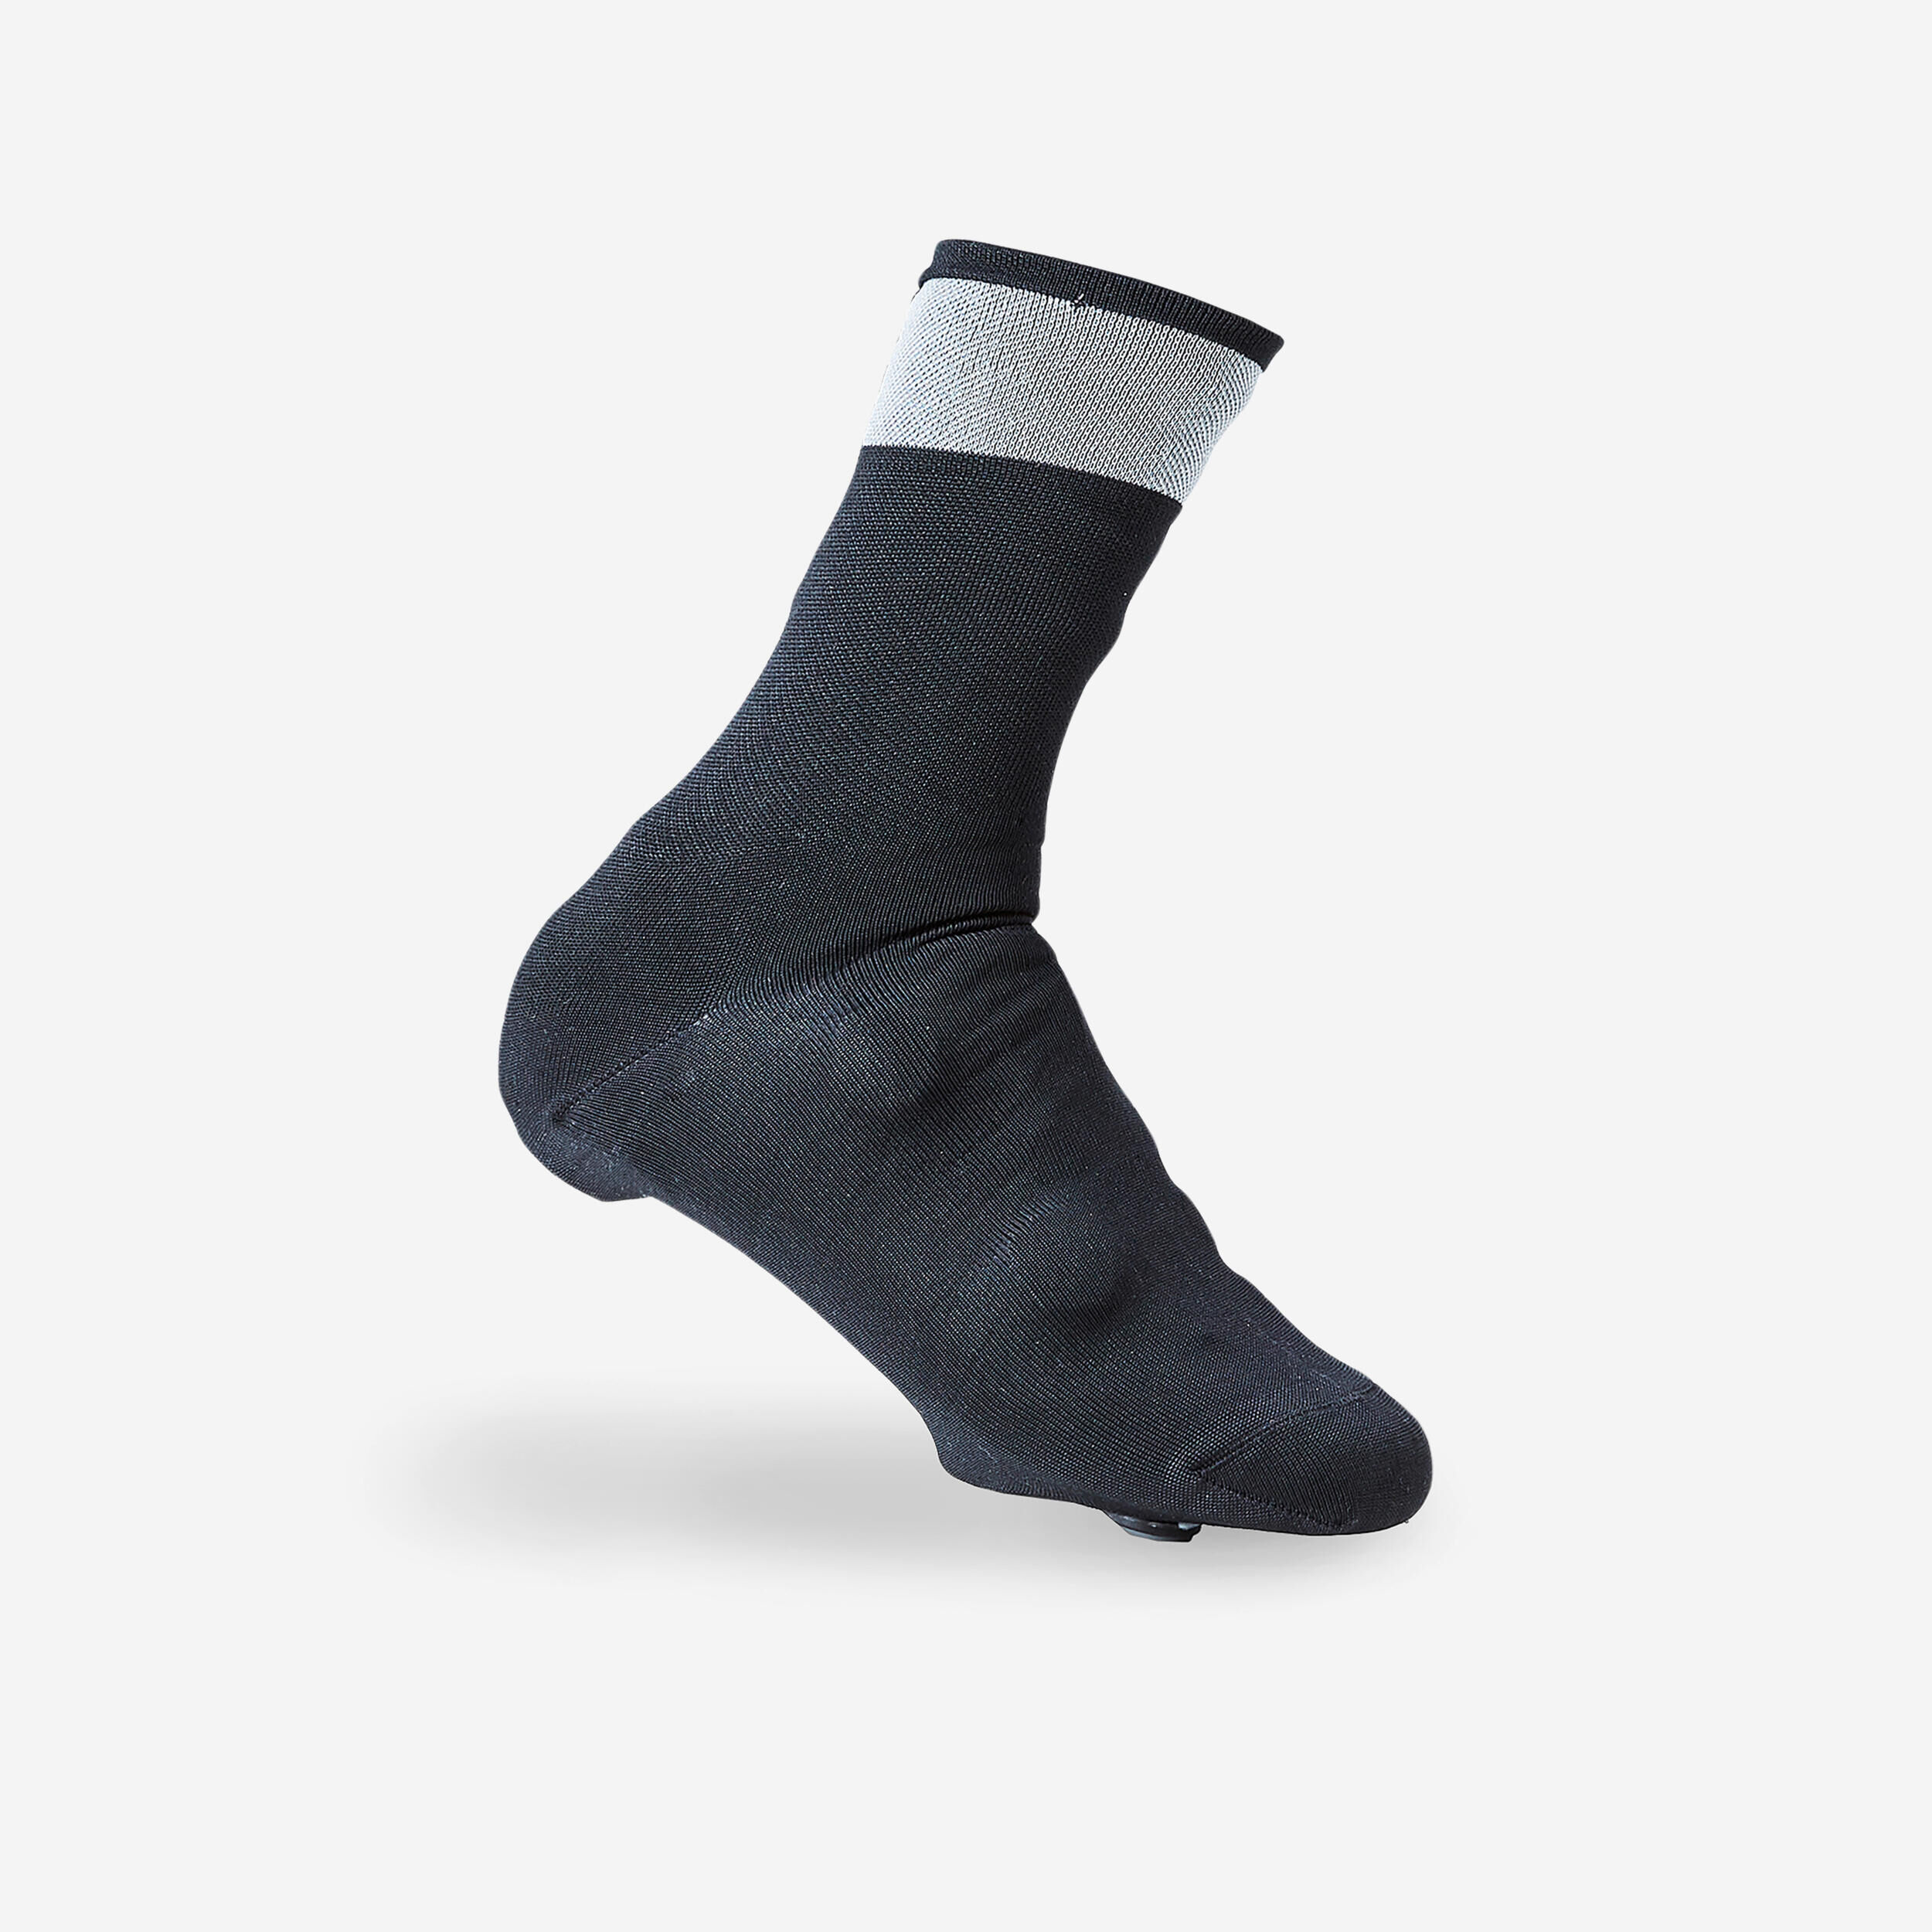 GIRO Knitted Cycling Overshoes - Black